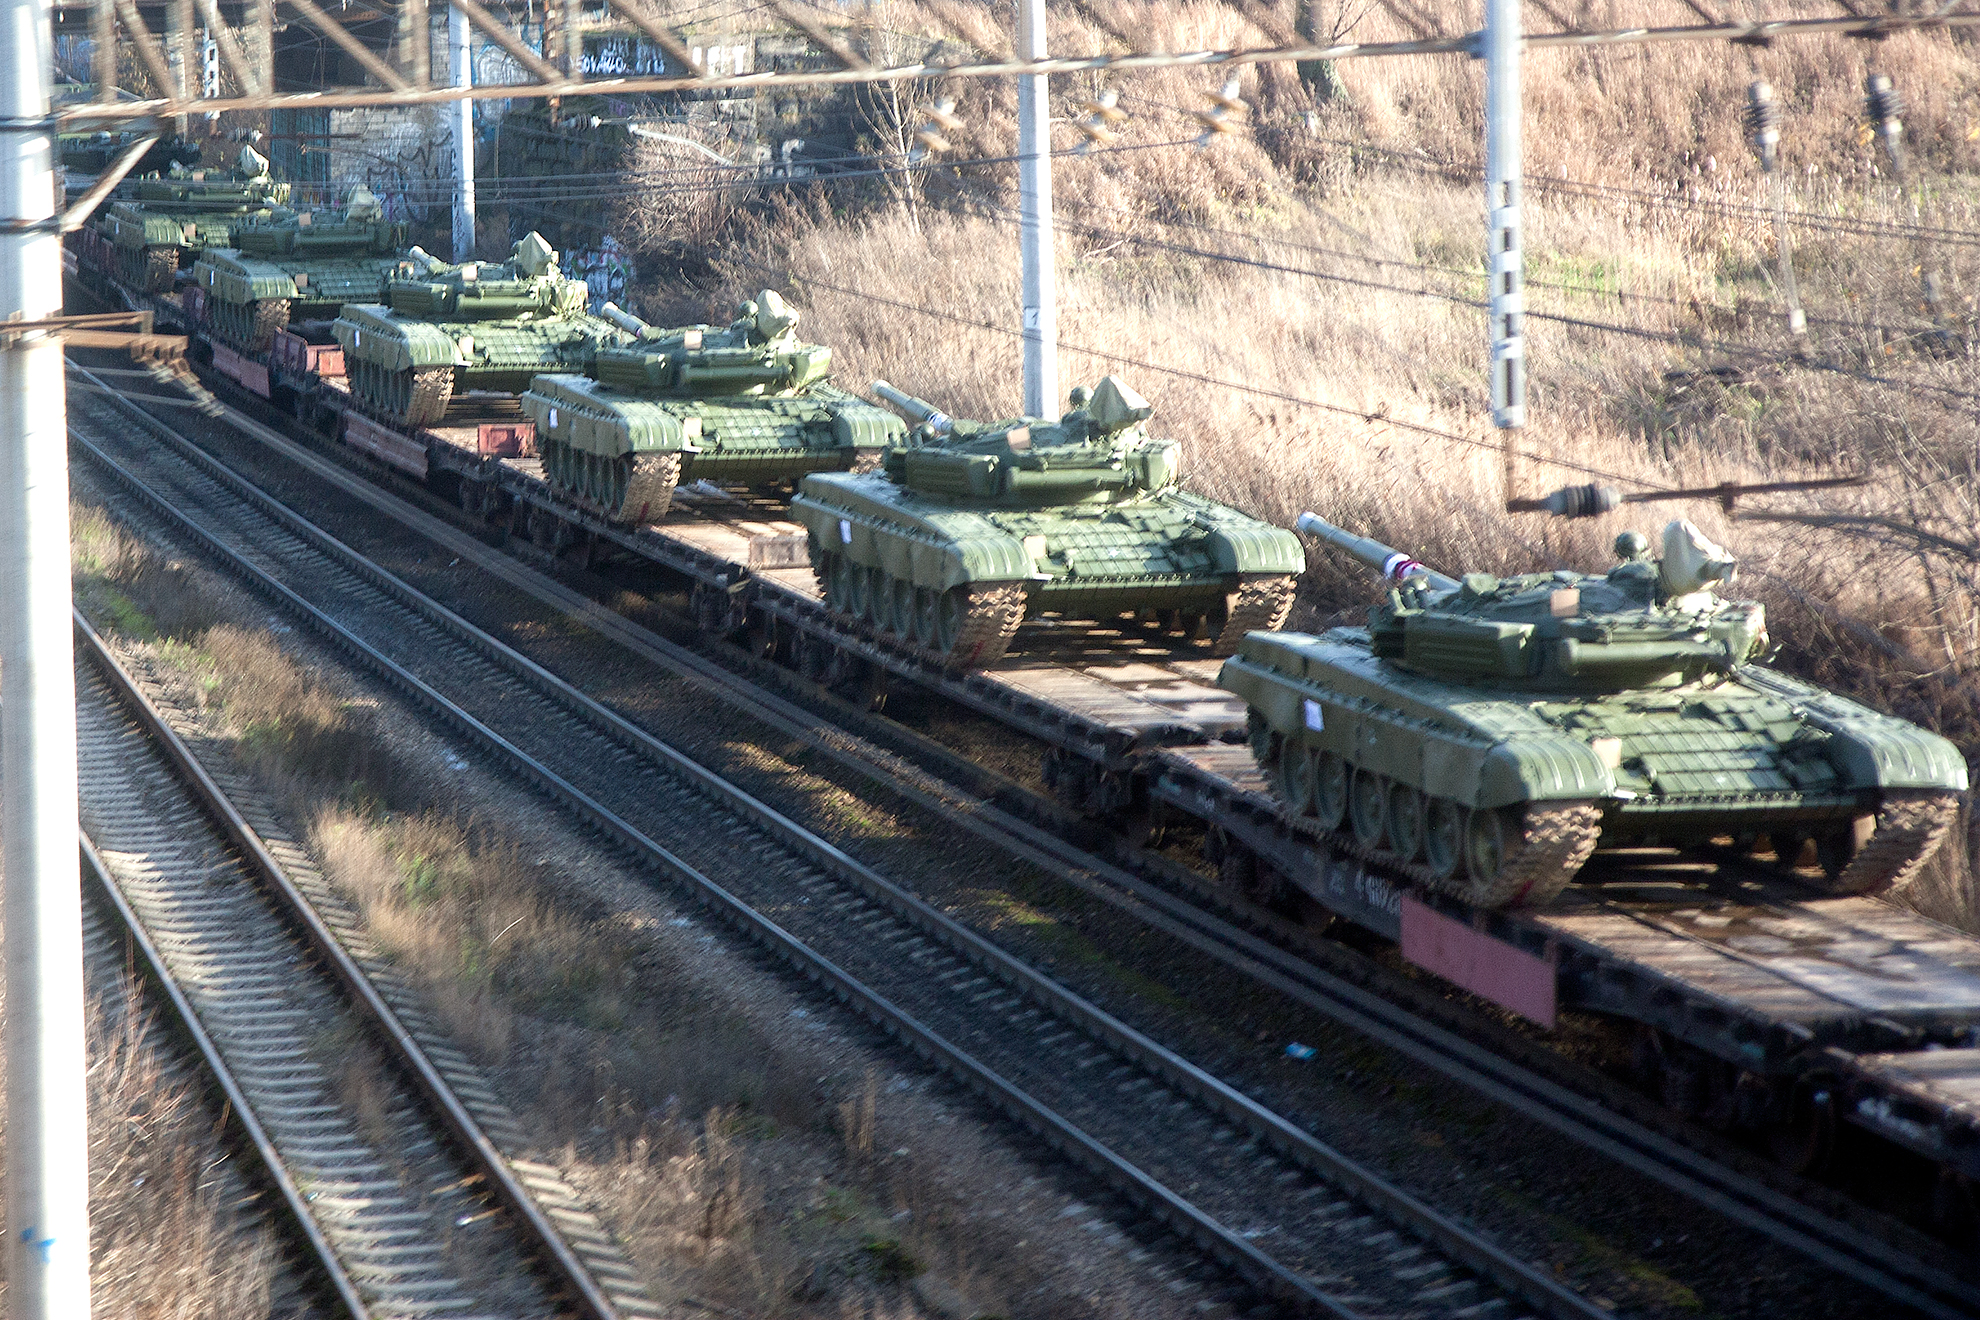 Tanks on the train being transporter through the middle of the city.